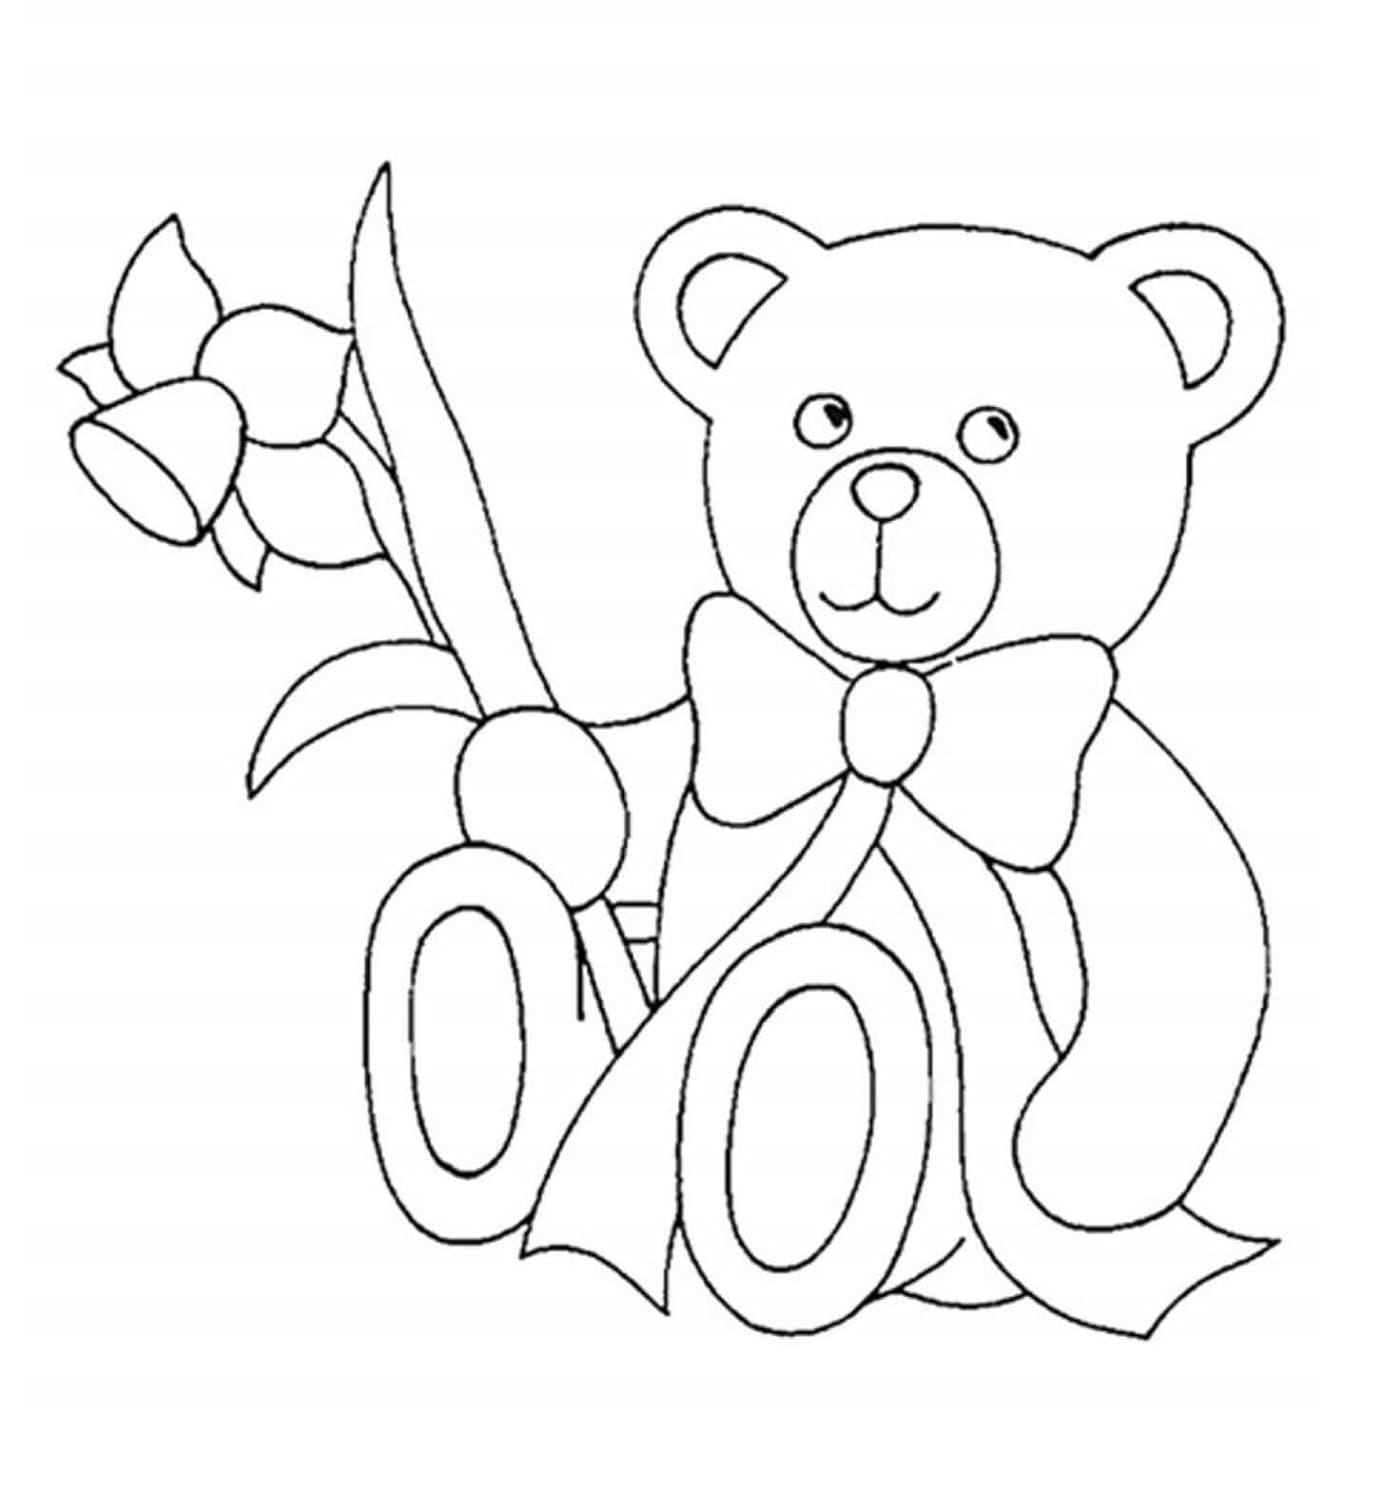 Printable Teddy Bear Holding Flower Coloring Page